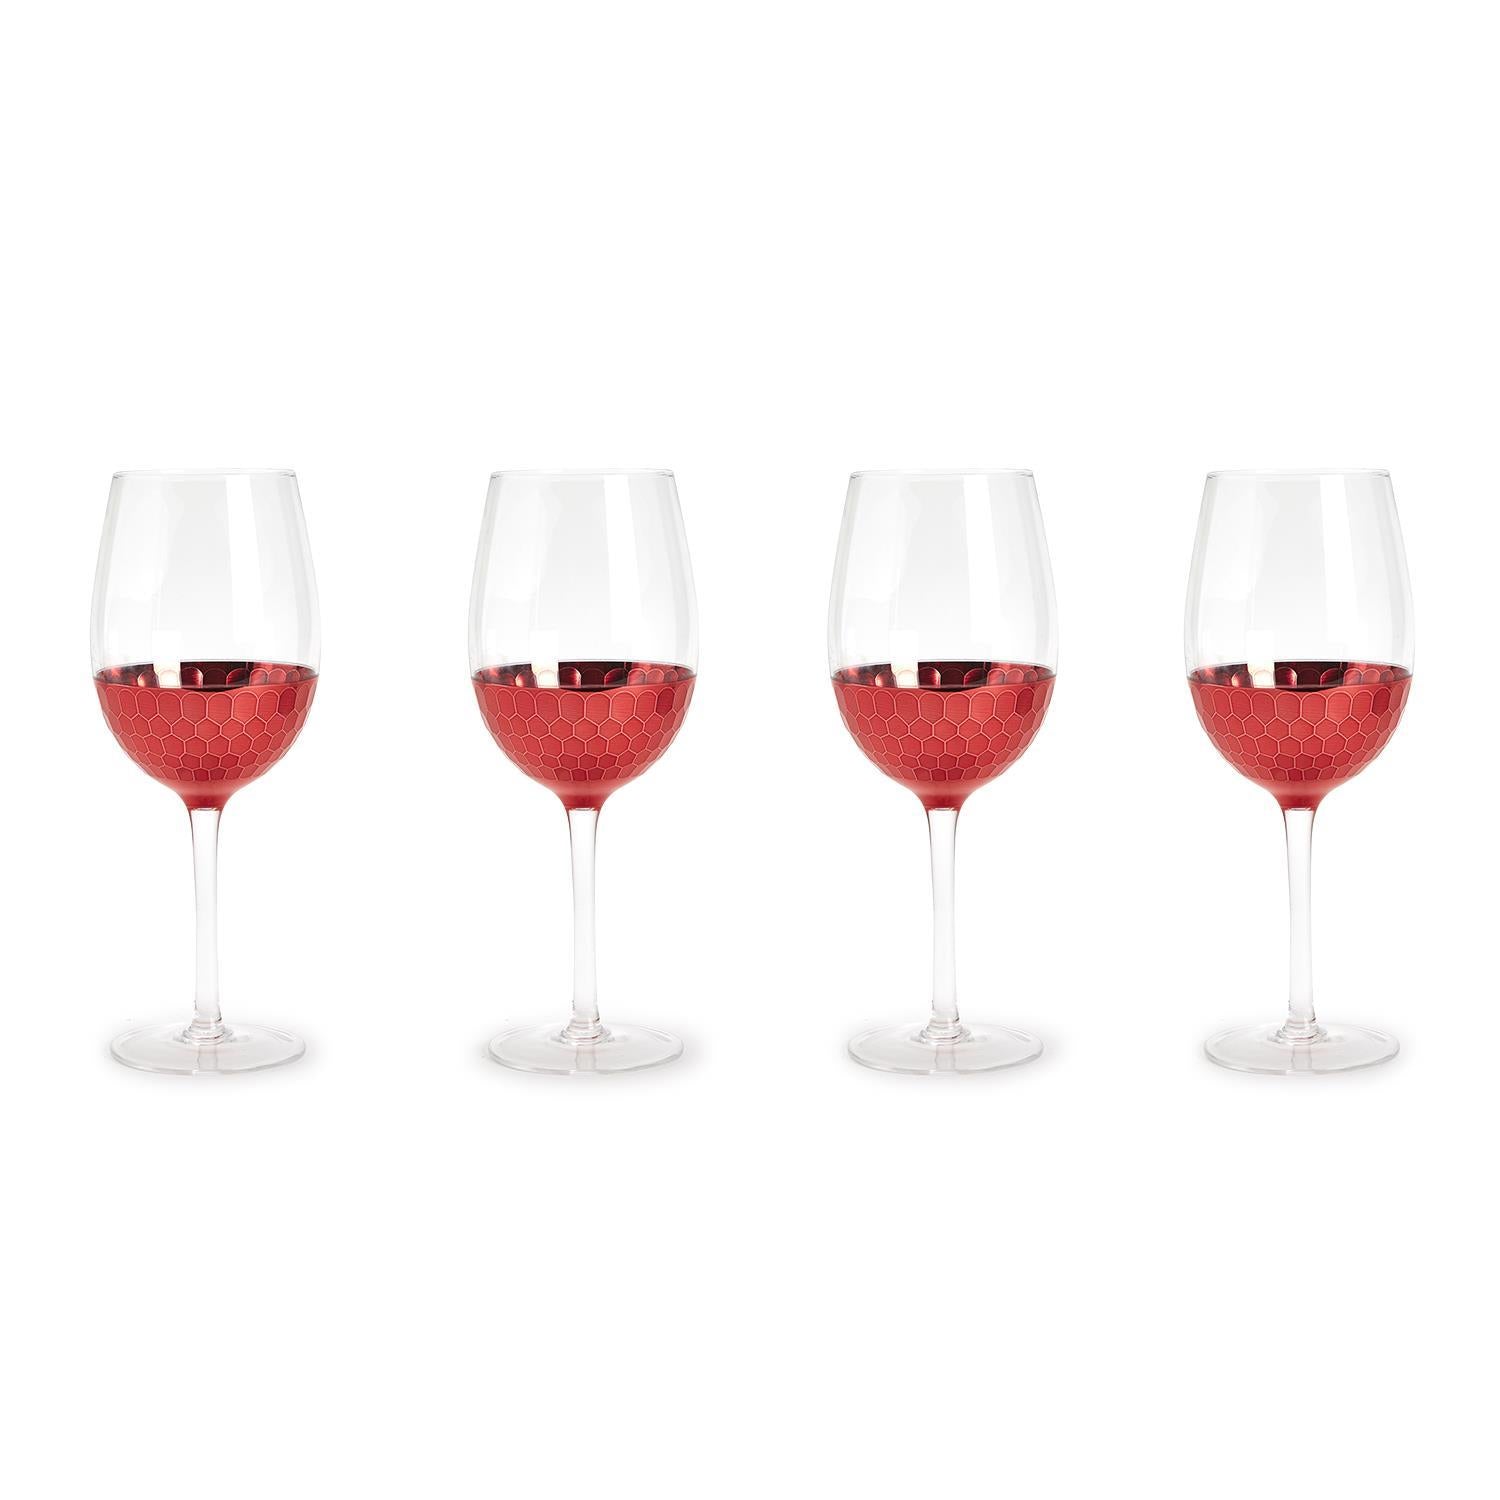 Two's Company Red Hot Set of 4 Pc Faceted Wine Glasses